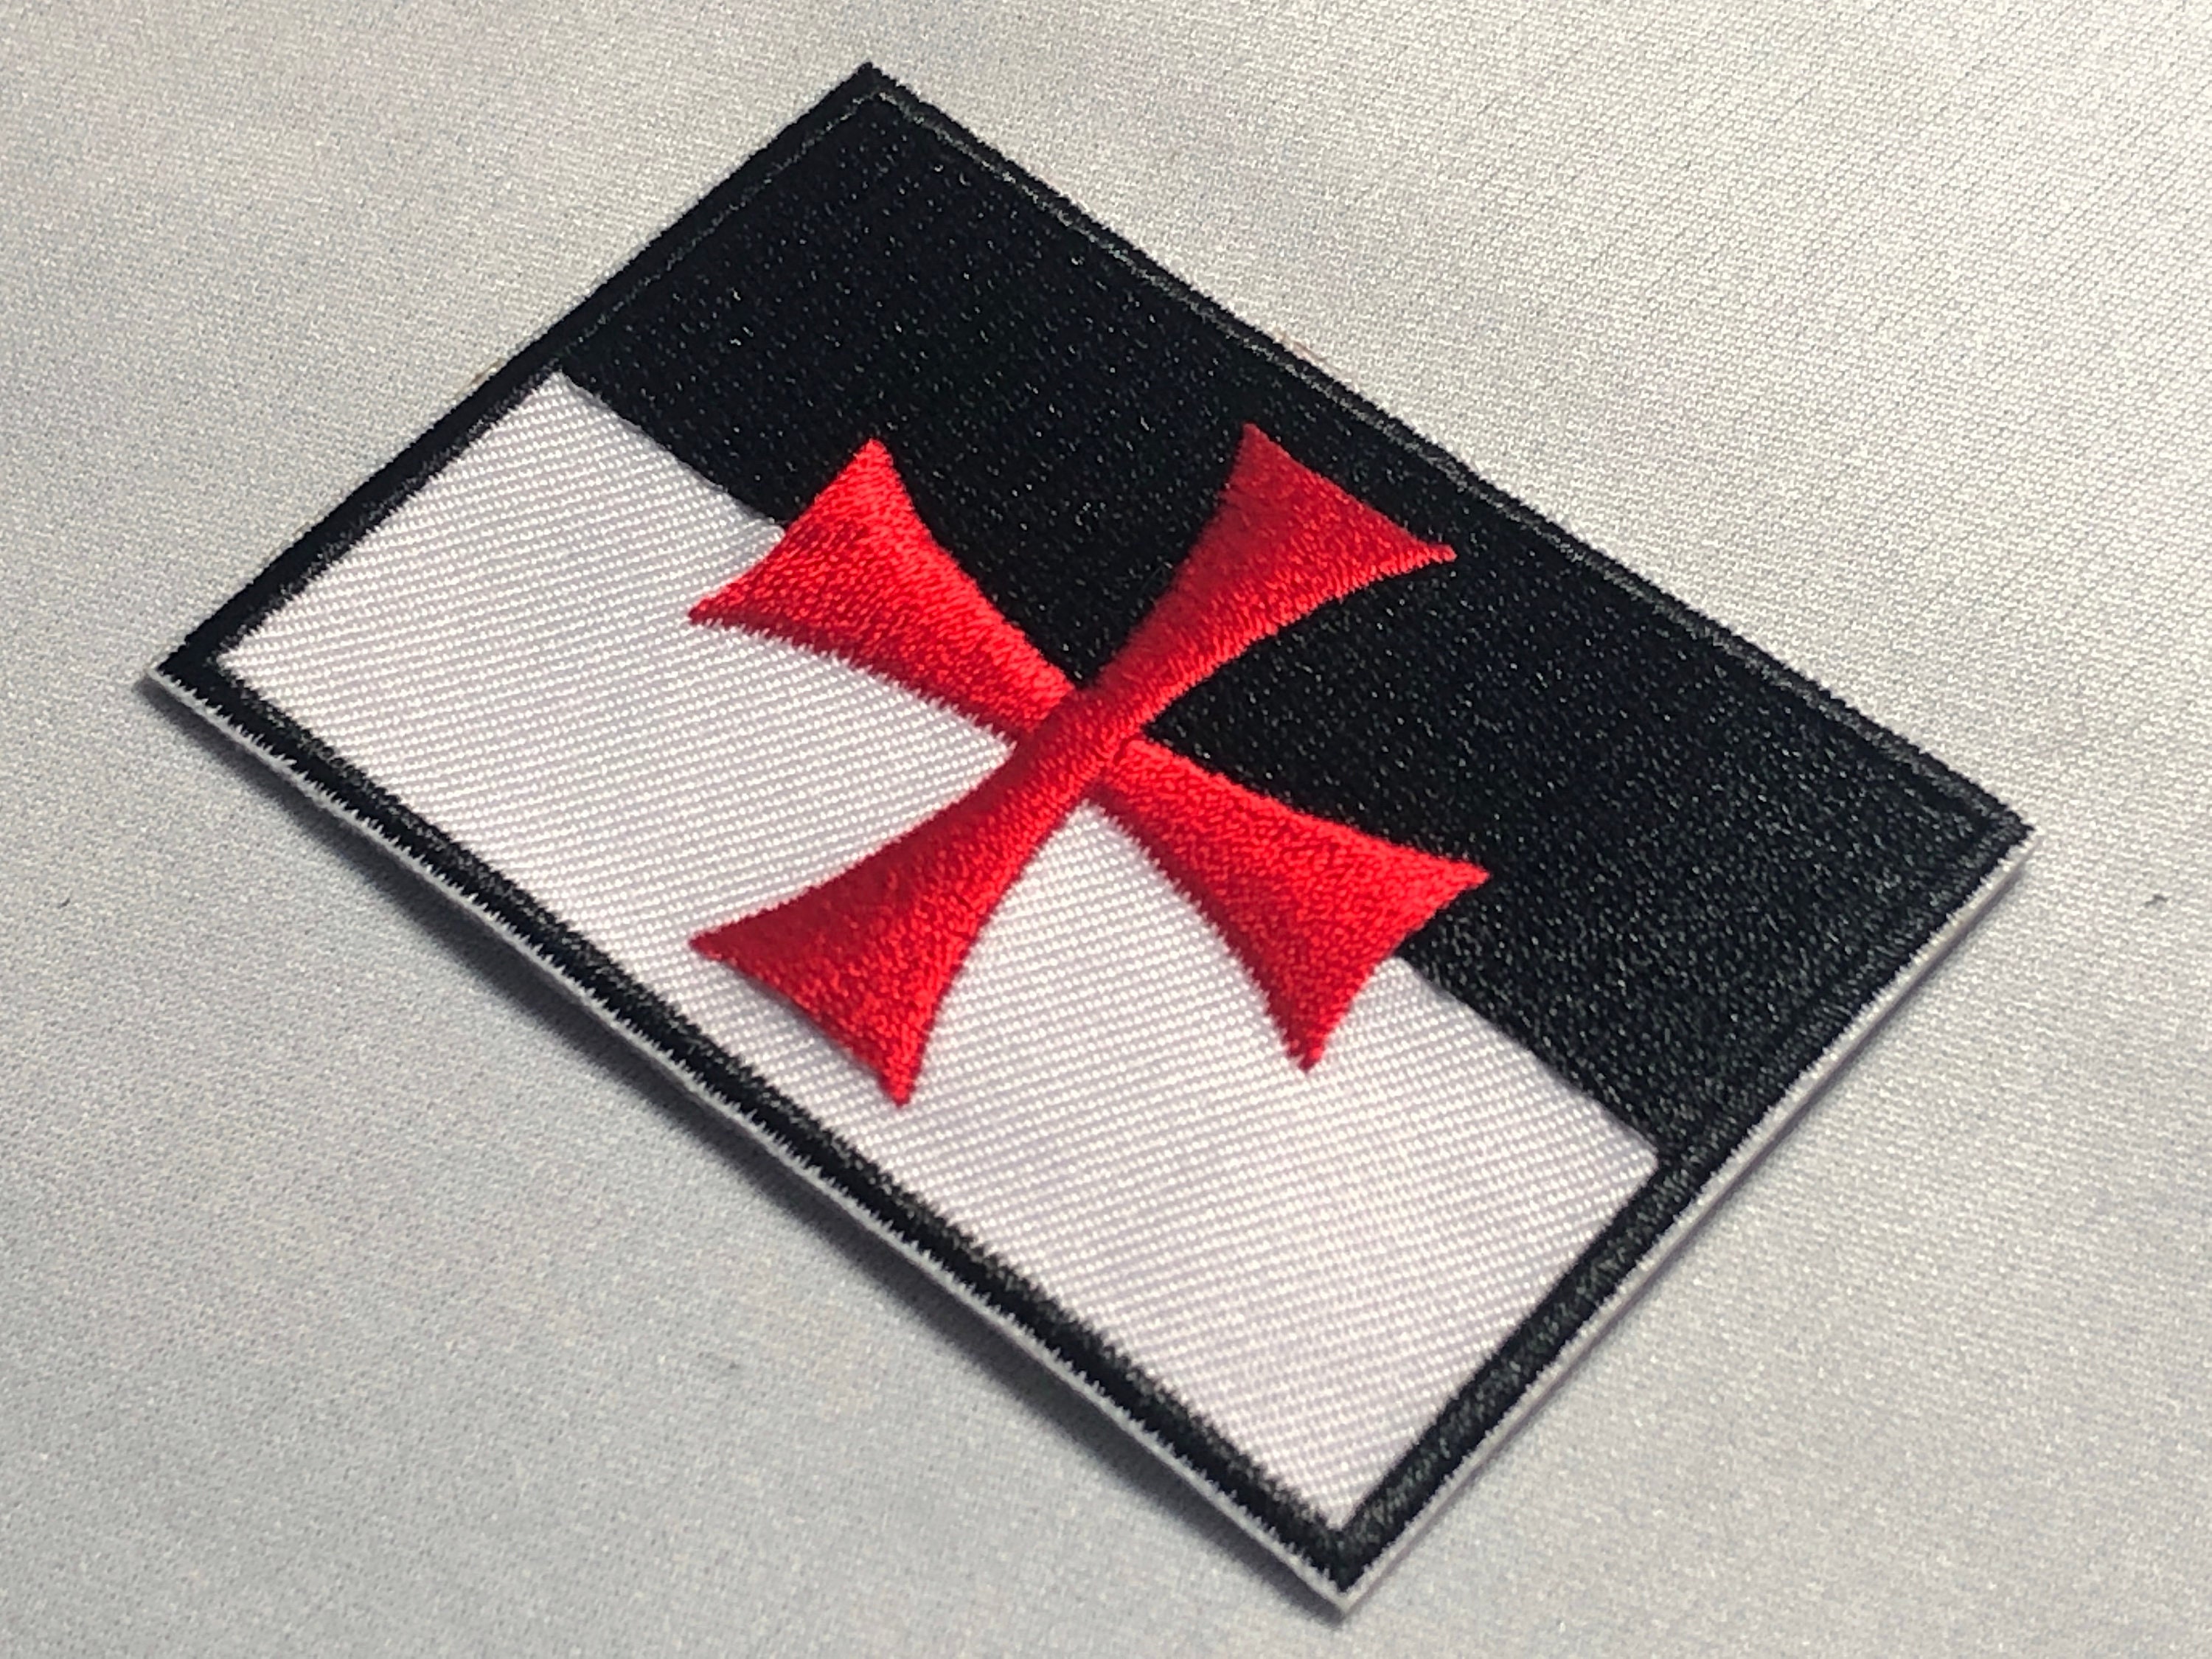 Trooper Clothing Crusaders Cross - Blk/Red PVC Patch